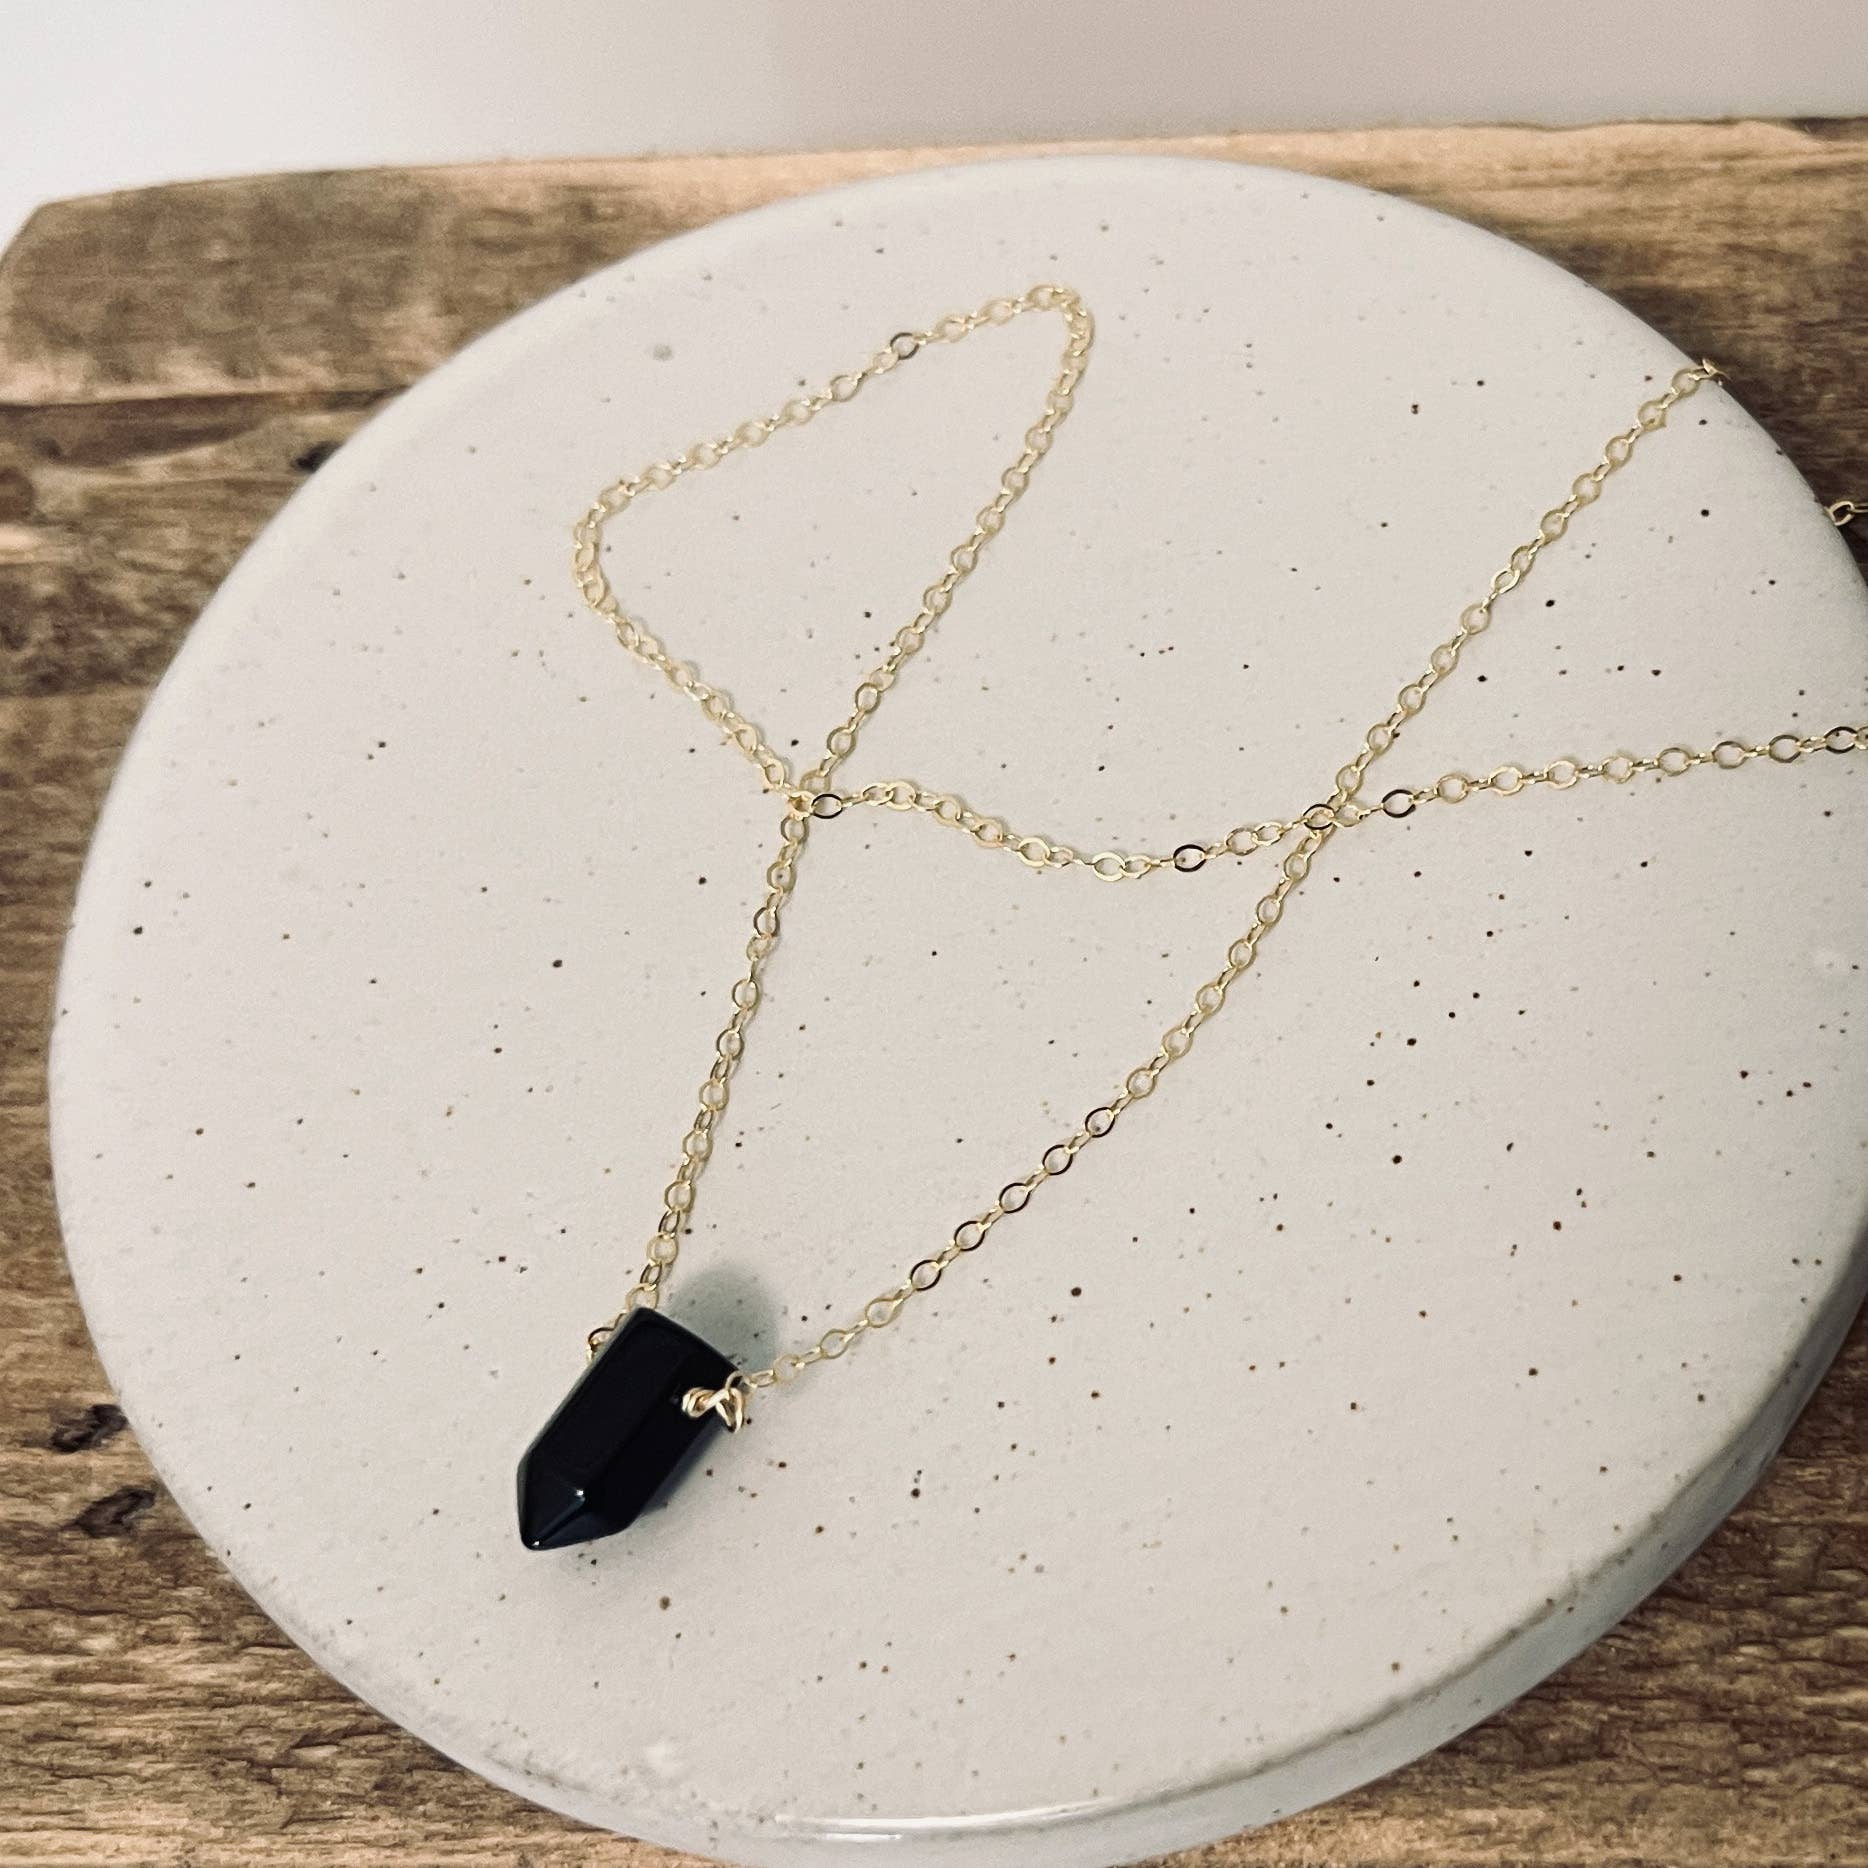 Black Onyx Point Necklace - Gold Filled or Sterling Silver - Sela+Sage - Pendant/Charm Necklace